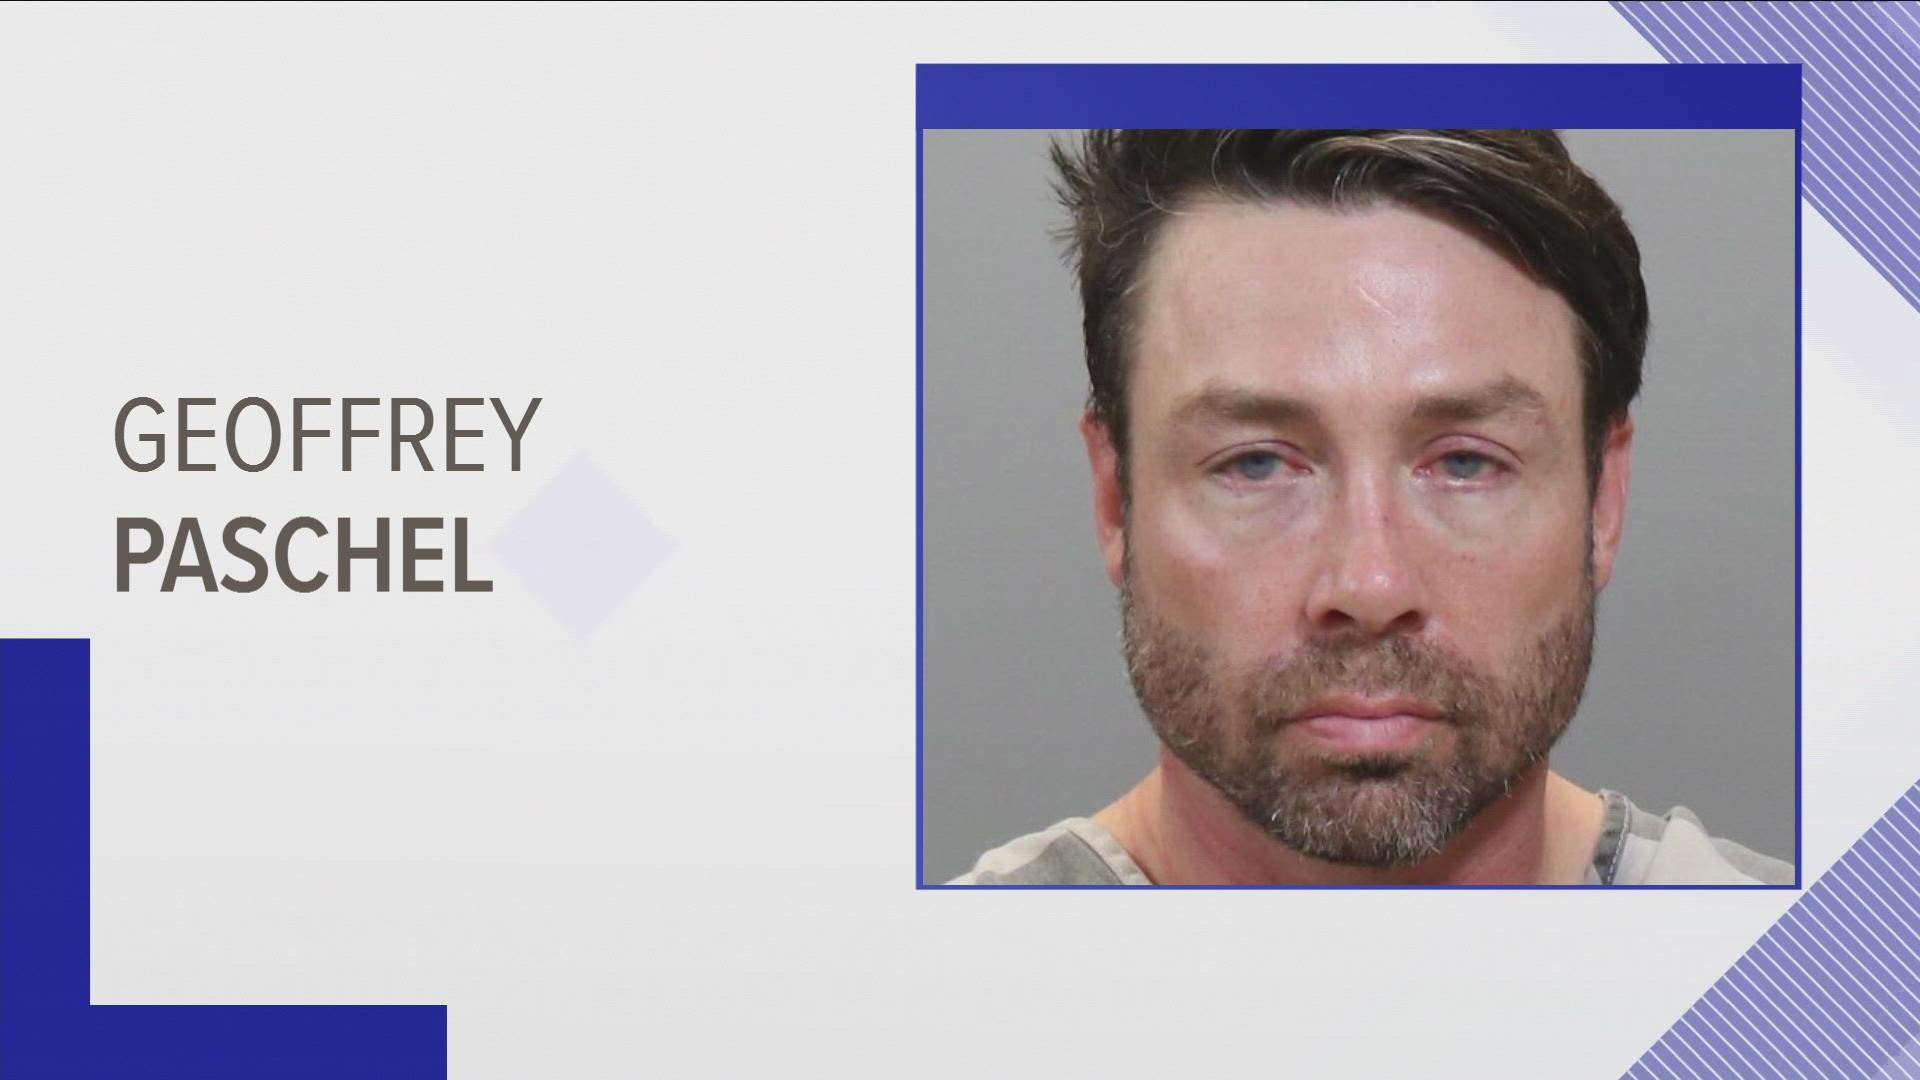 According to authorities, Geoffrey Ian Paschel, 44, was convicted of aggravated kidnapping, domestic assault and interference with emergency calls.